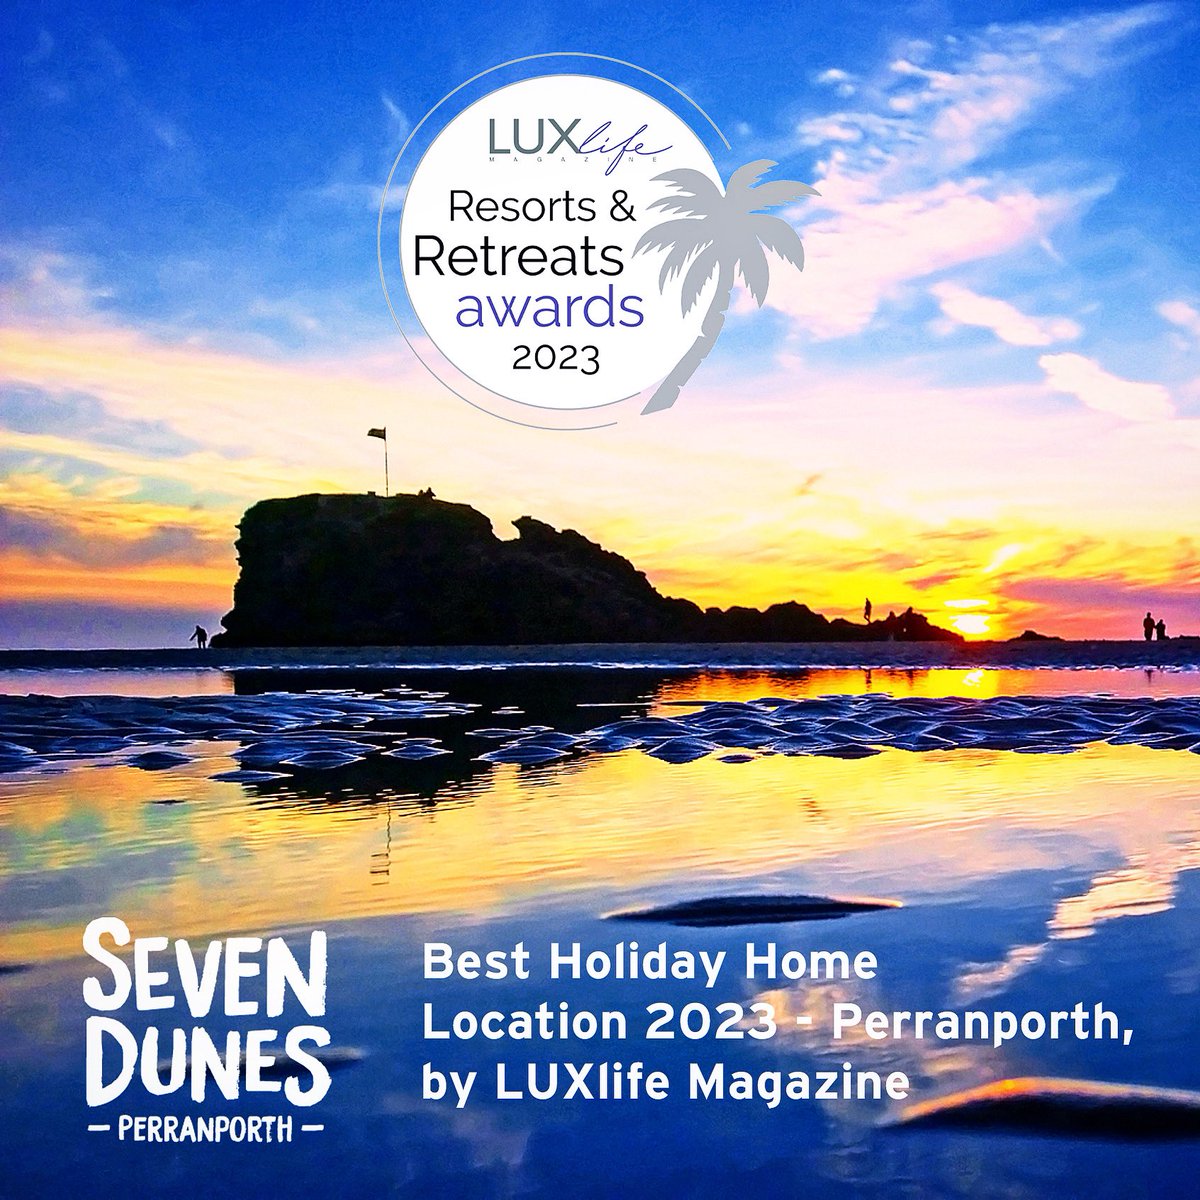 Have you booked your holiday yet? 

Did you know… our Beachside apartment is an AWARD WINNER!!! Seven Dunes has won the Best Holiday Home Location 2023 - Perranporth, by LUXlife Magazine 
lux-review.com/winners/seven-…

👍☀️😎🏖️🏄‍♂️ 
#SevenDunes #Perranporth #Cornwall #selfcatering